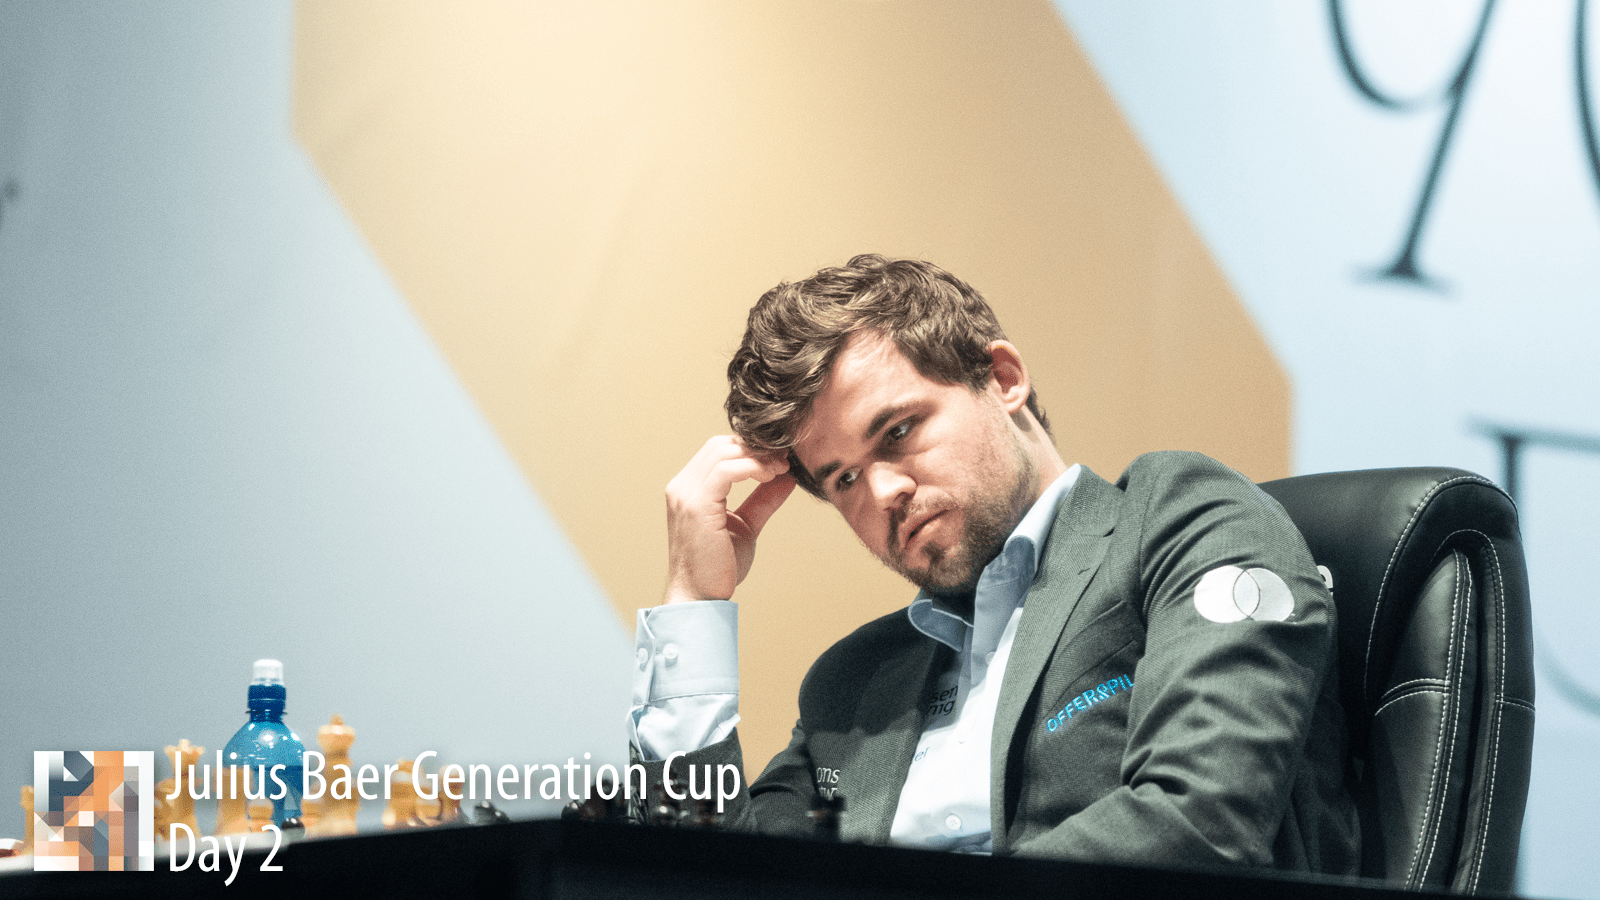 chess24.com on X: Hans Niemann can't quite pull off a 4th win in a row and  ends the #USChessChamps on 2699.1, so still won't quite be 2700 on the next  official rating